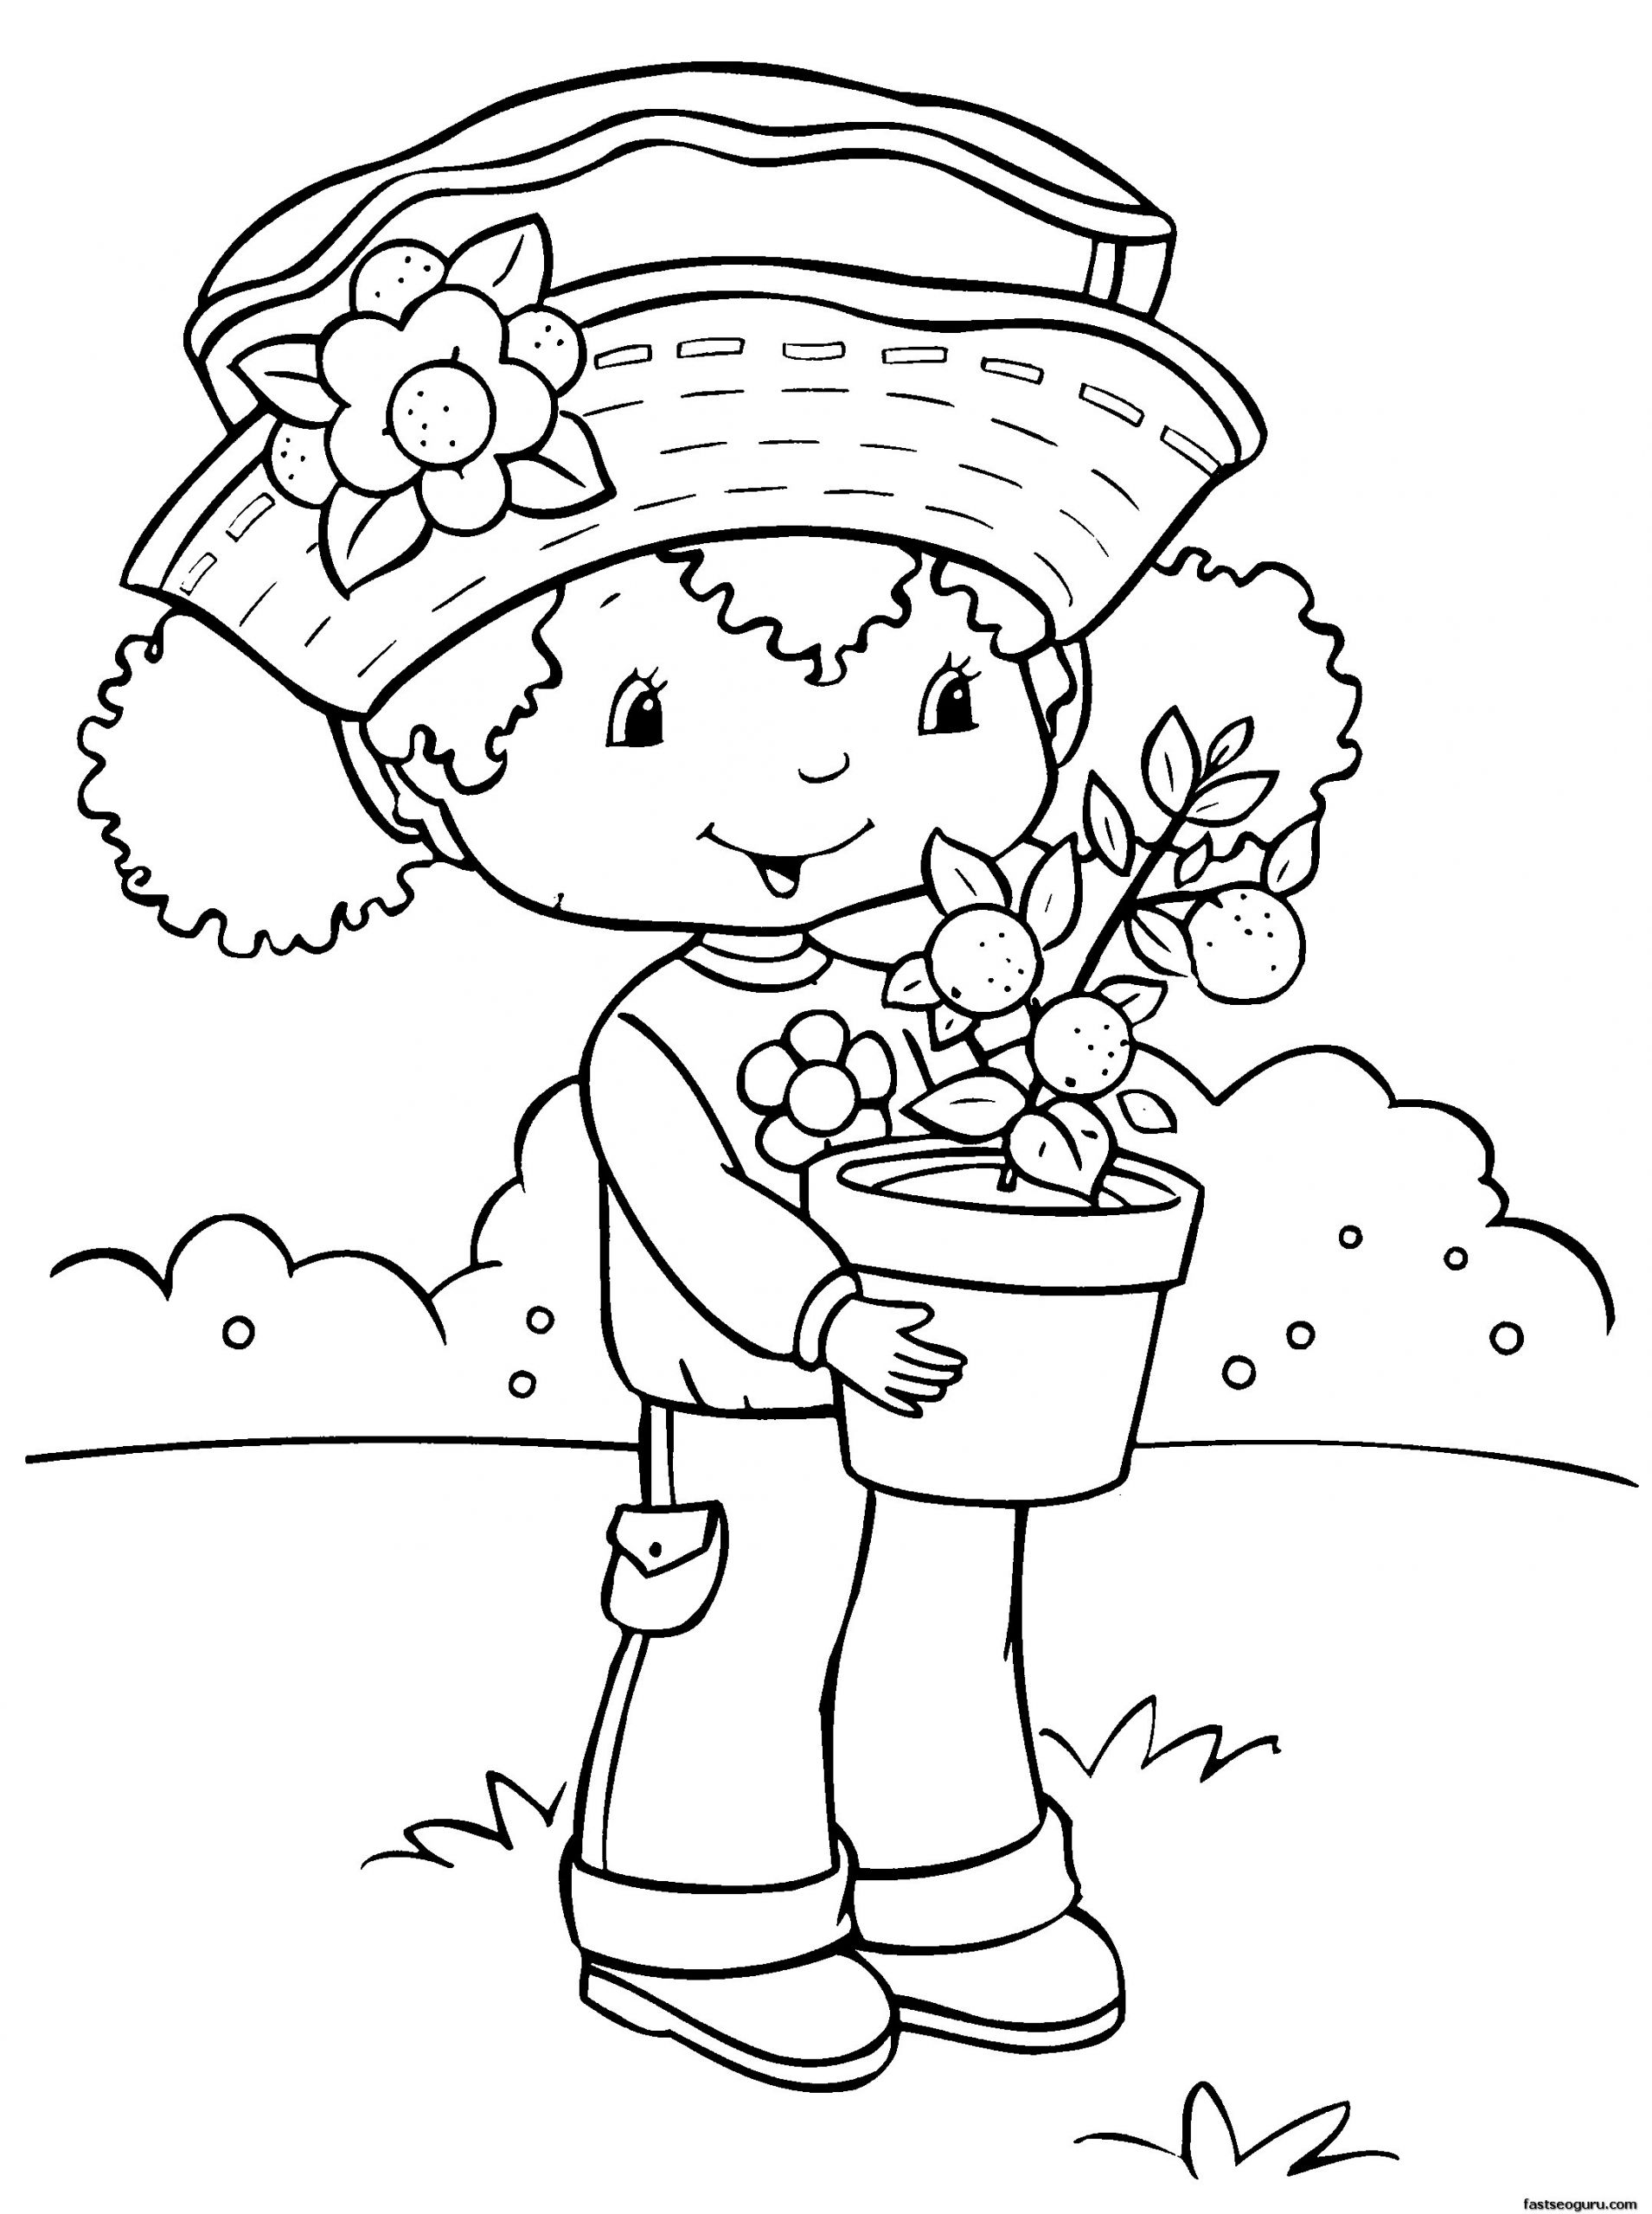 Free Coloring Pages For Girls
 Printable cartoon Strawberry Shortcake coloring pages for